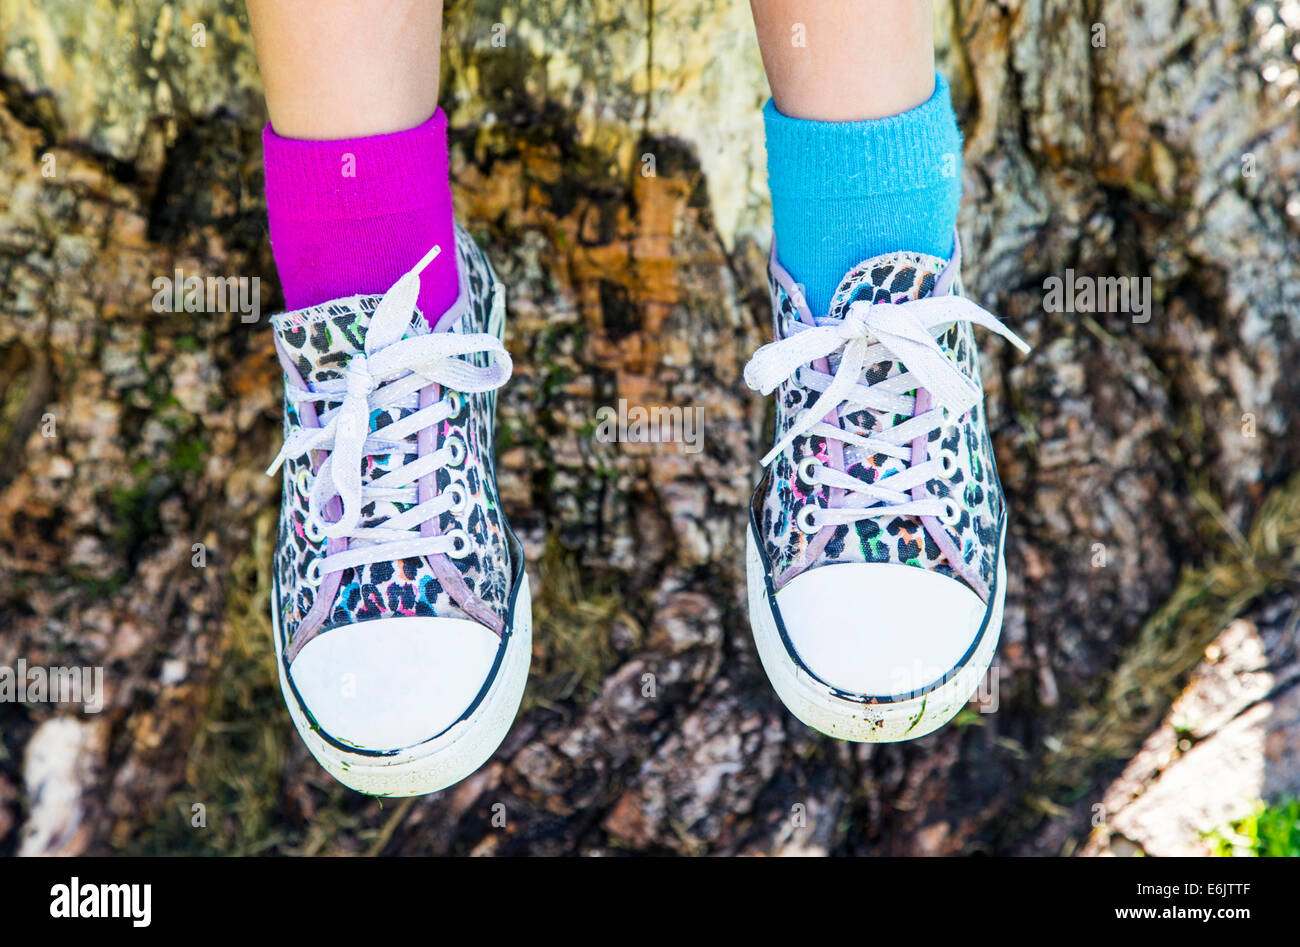 Photograph of seven year old girl's colorful sneakers and two different colors of socks Stock Photo